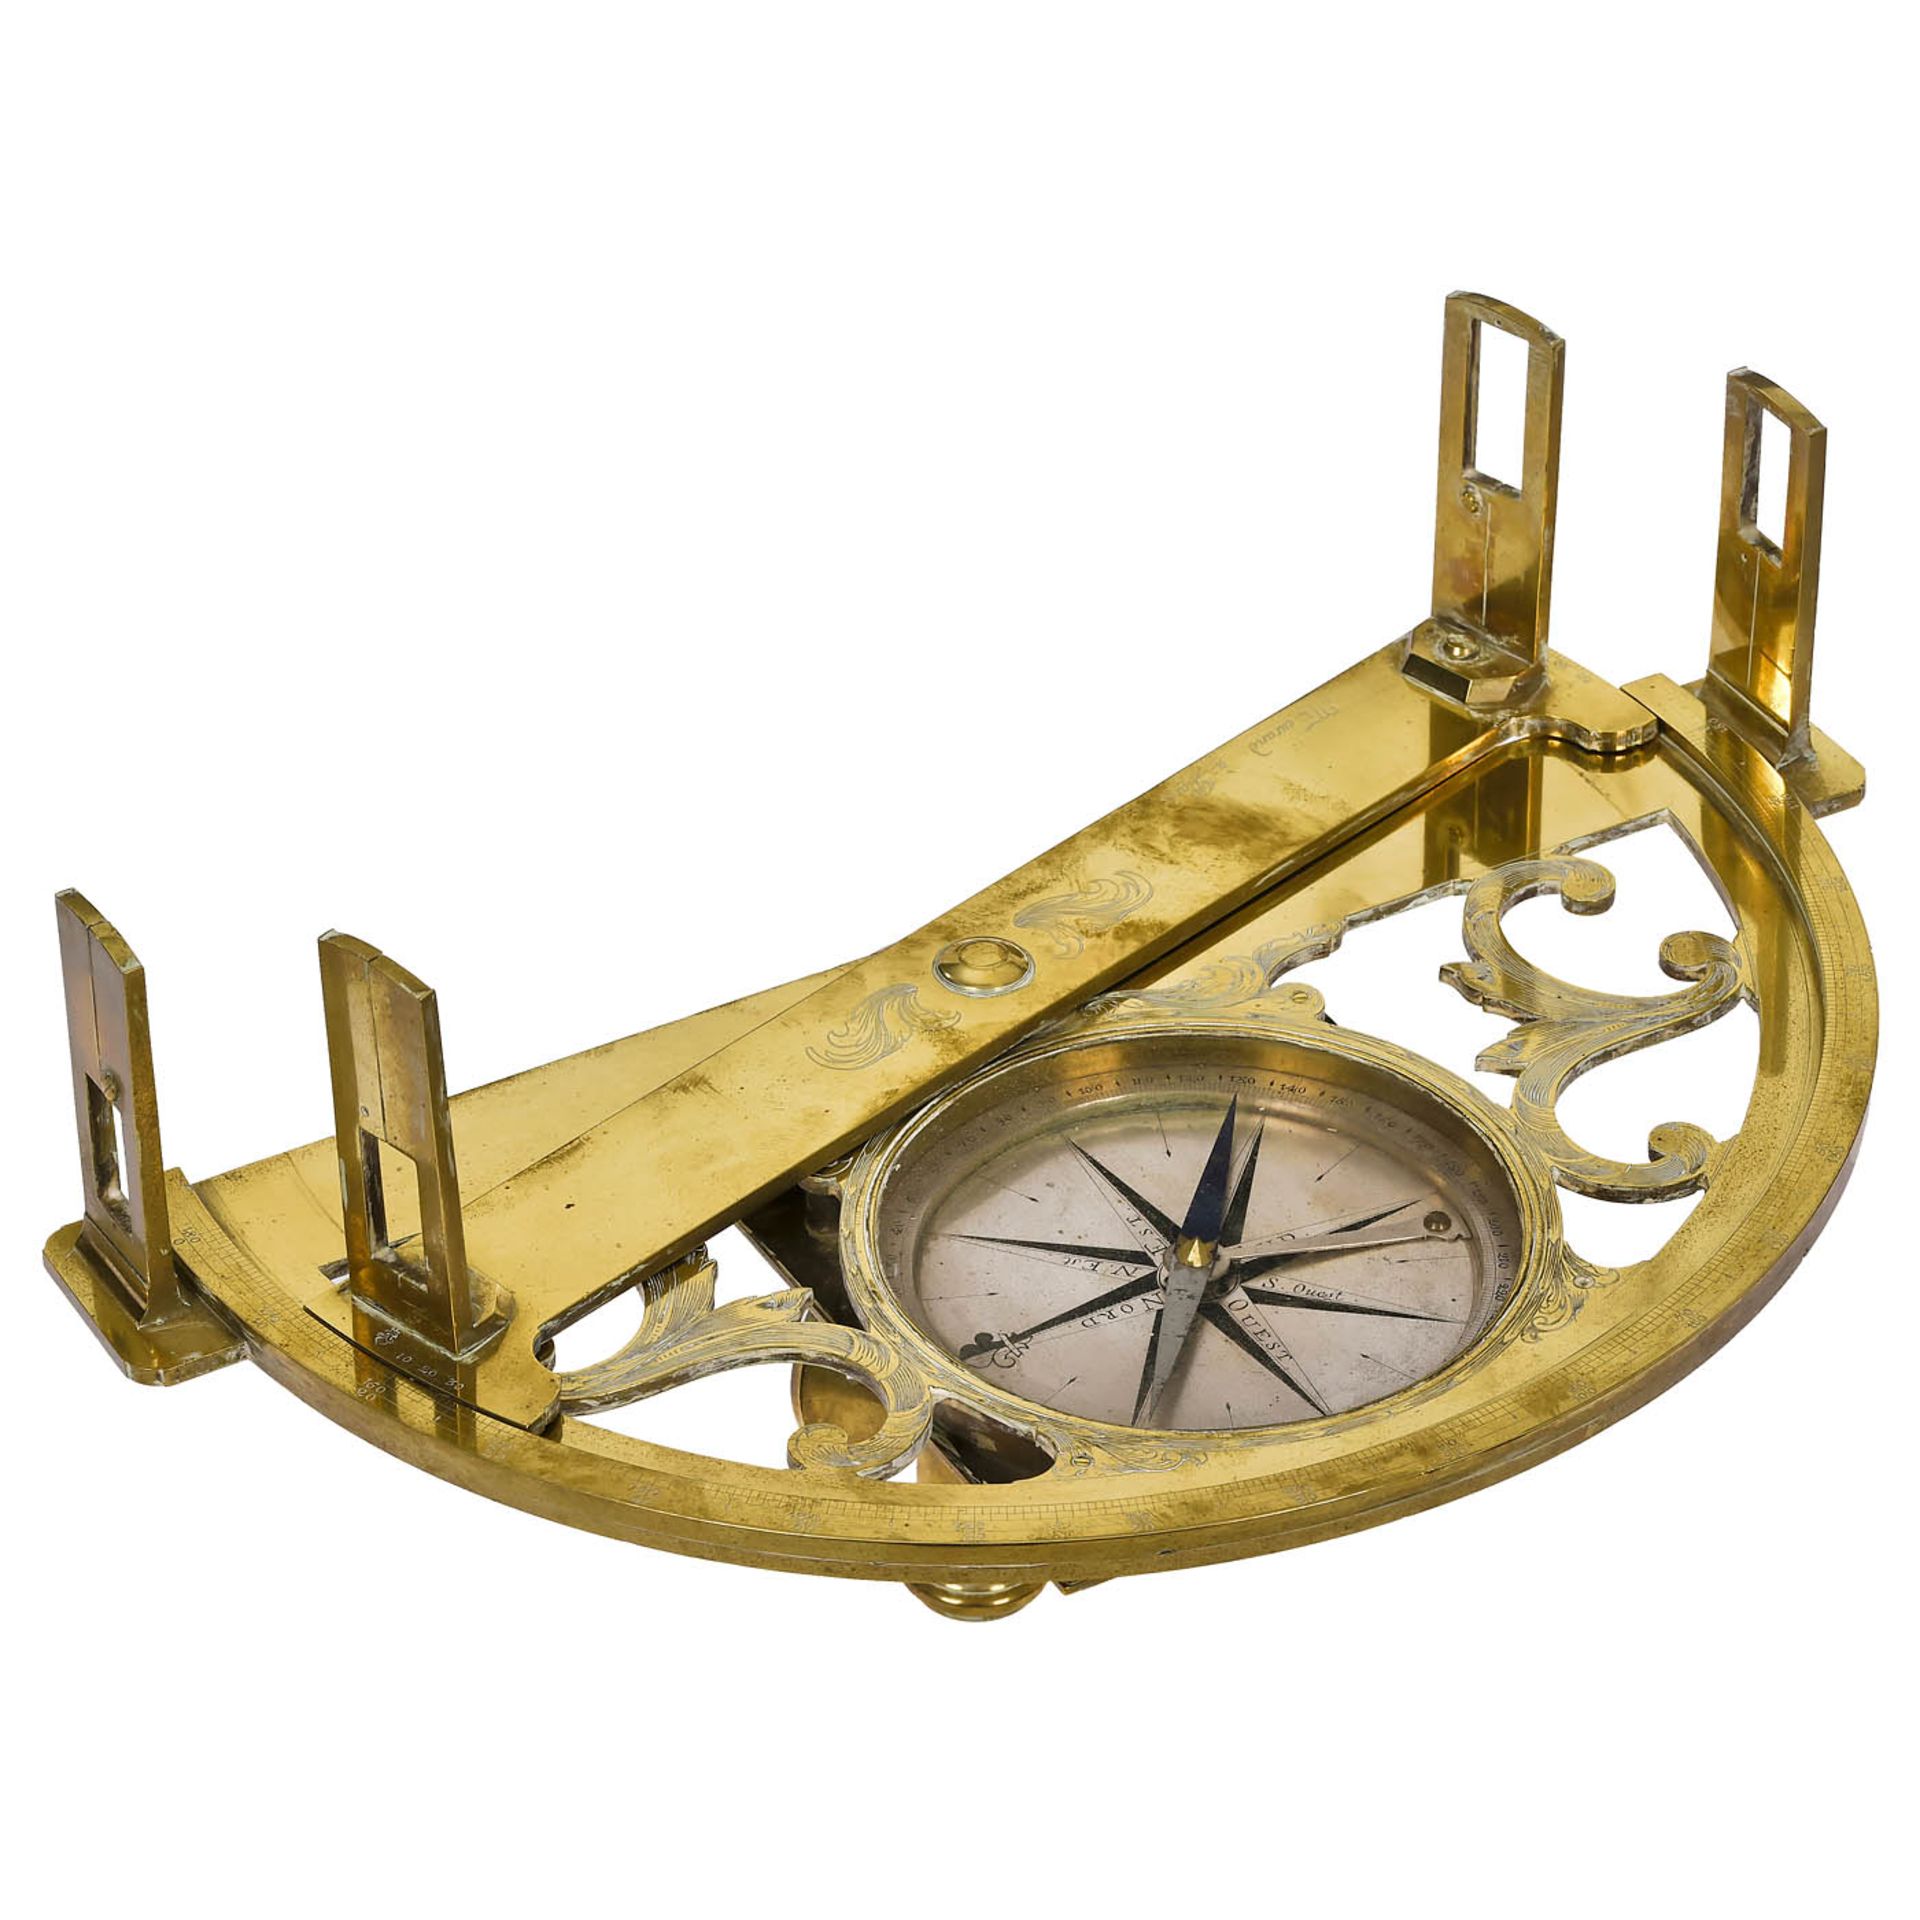 Large French Graphometer by Lennel, c. 1780